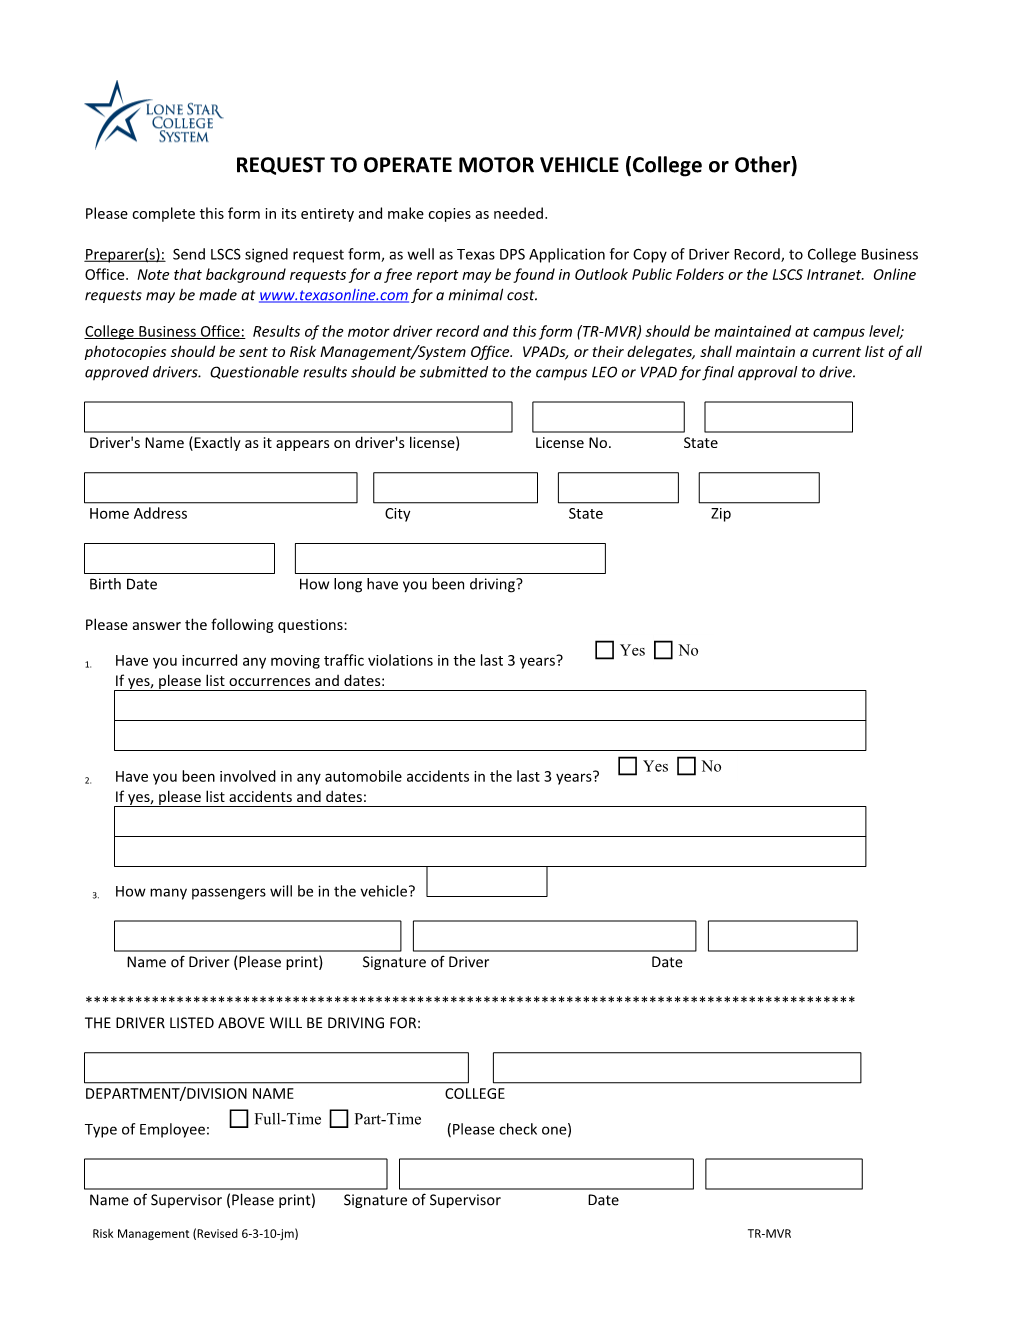 REQUEST to OPERATE MOTOR VEHICLE (College Or Other)